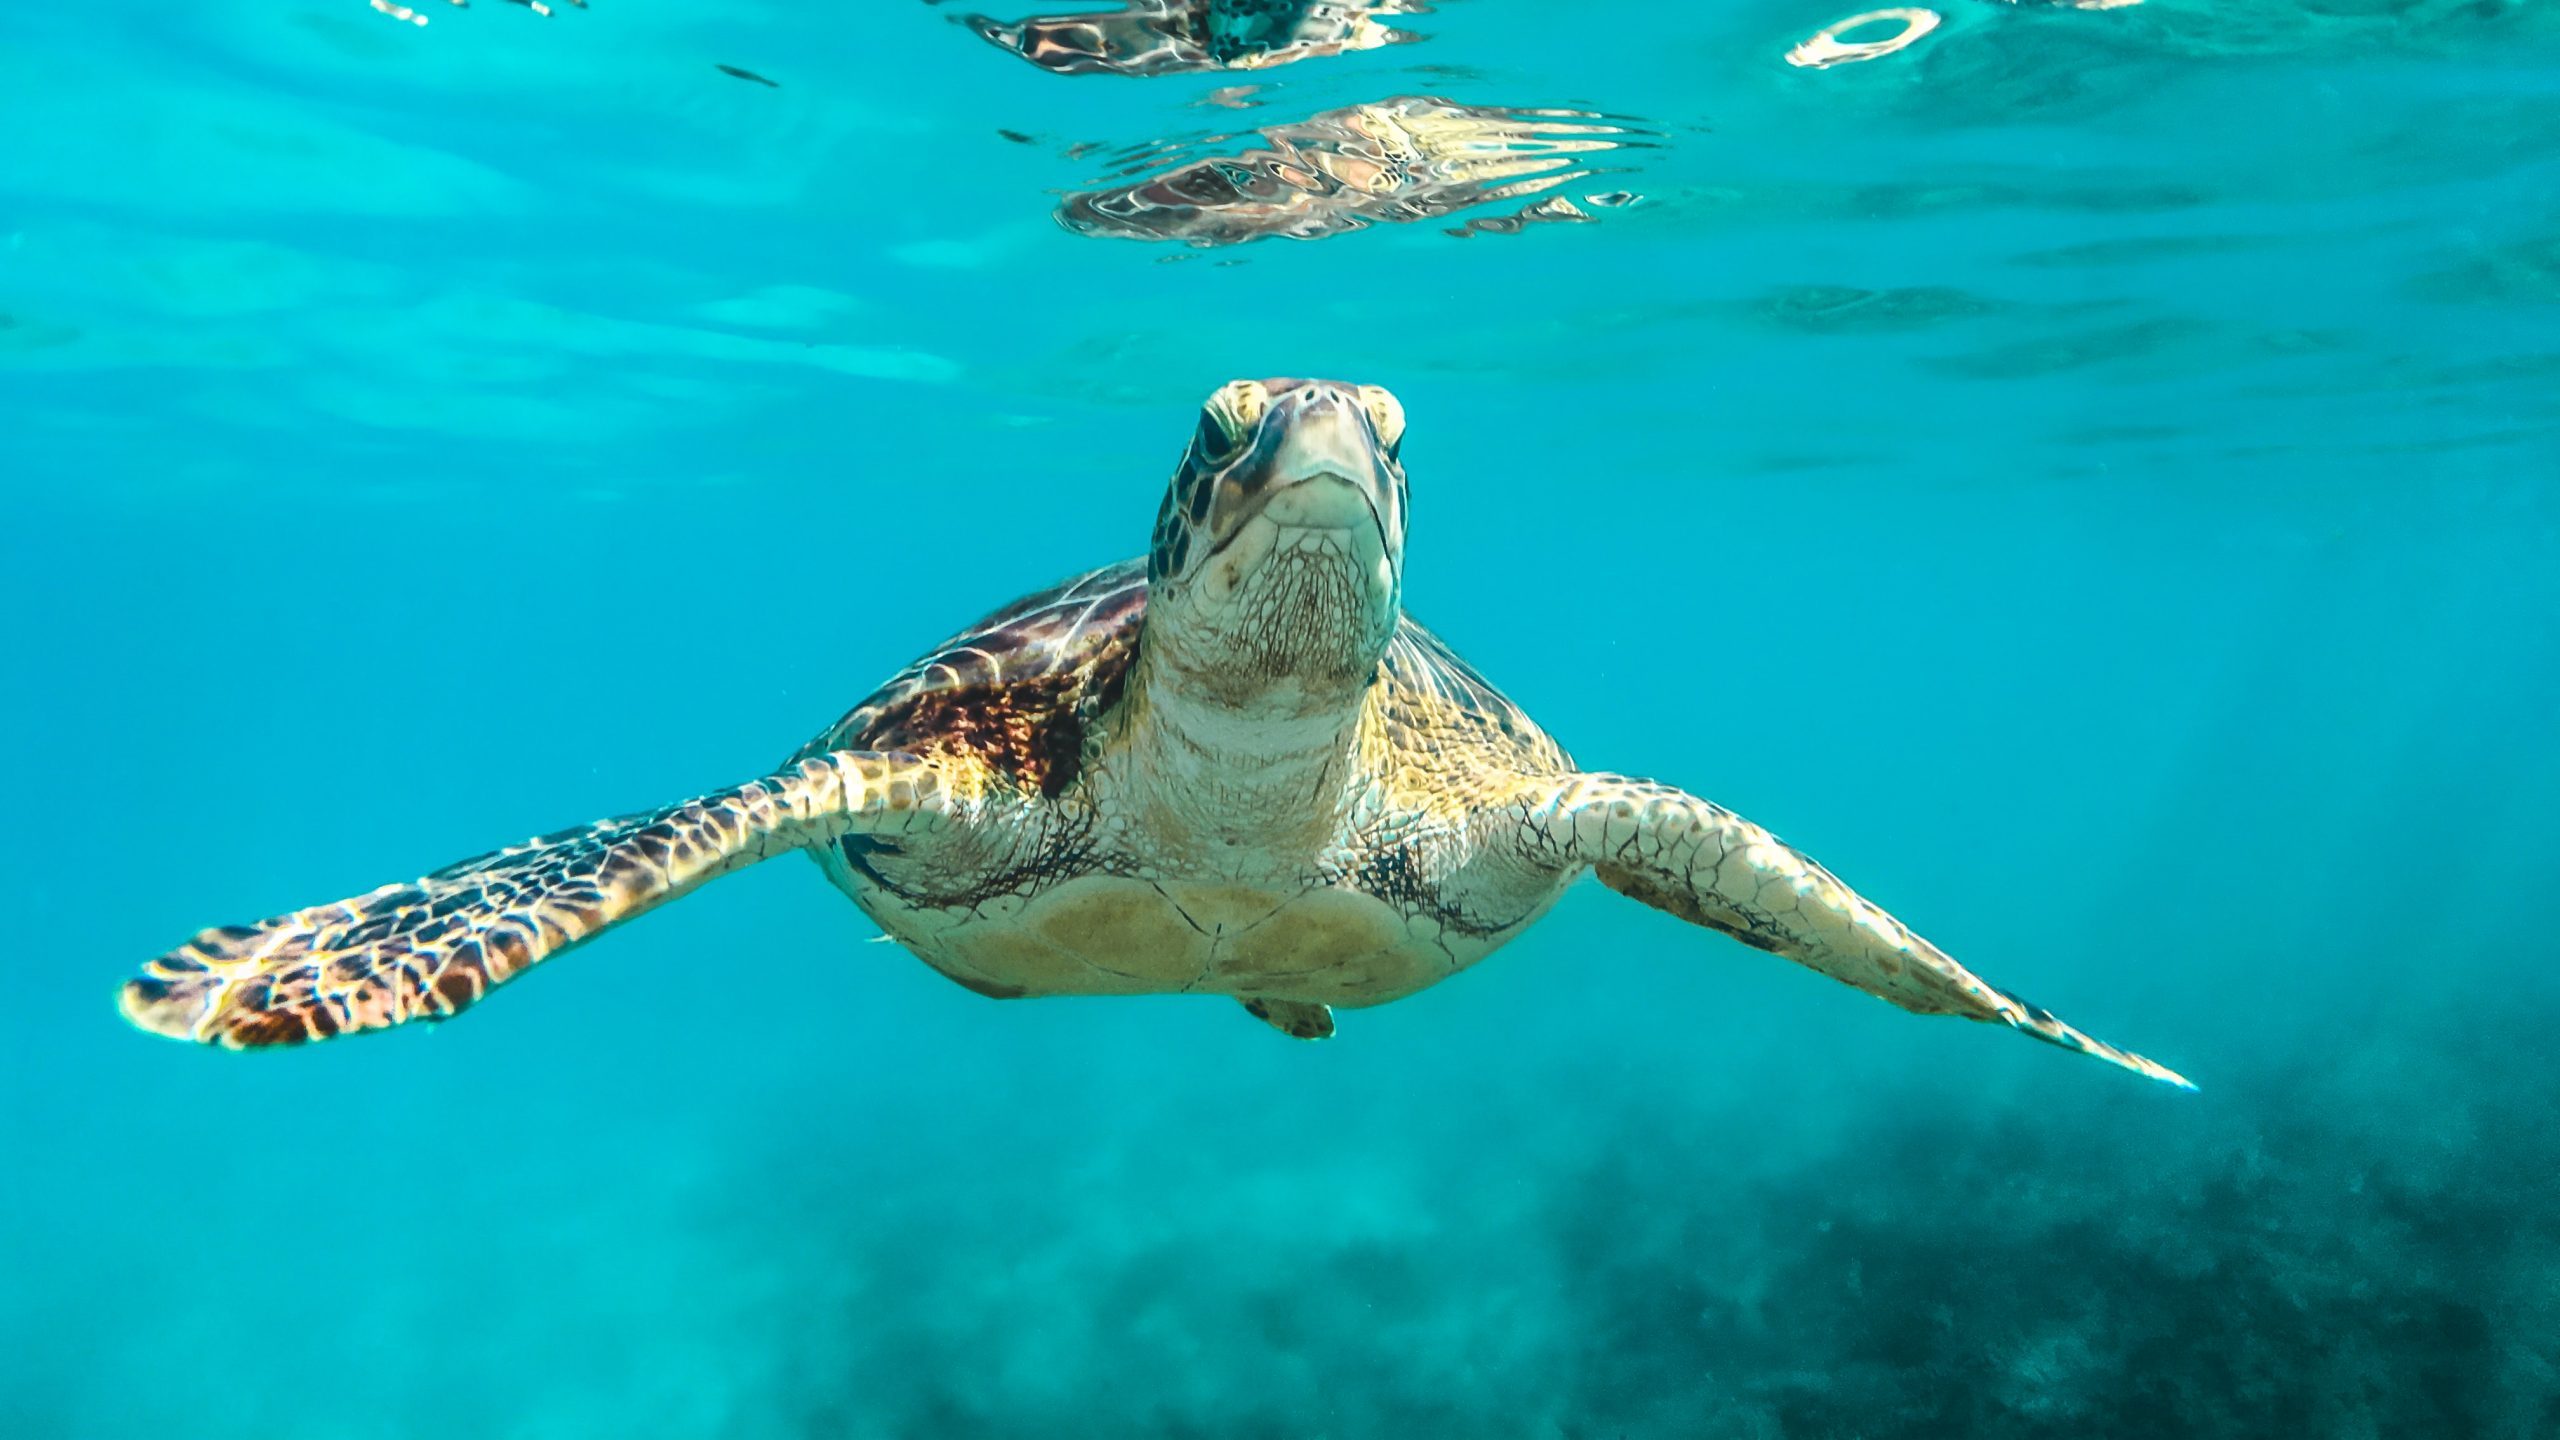 Cruise ships posing risk to sea turtles review finds